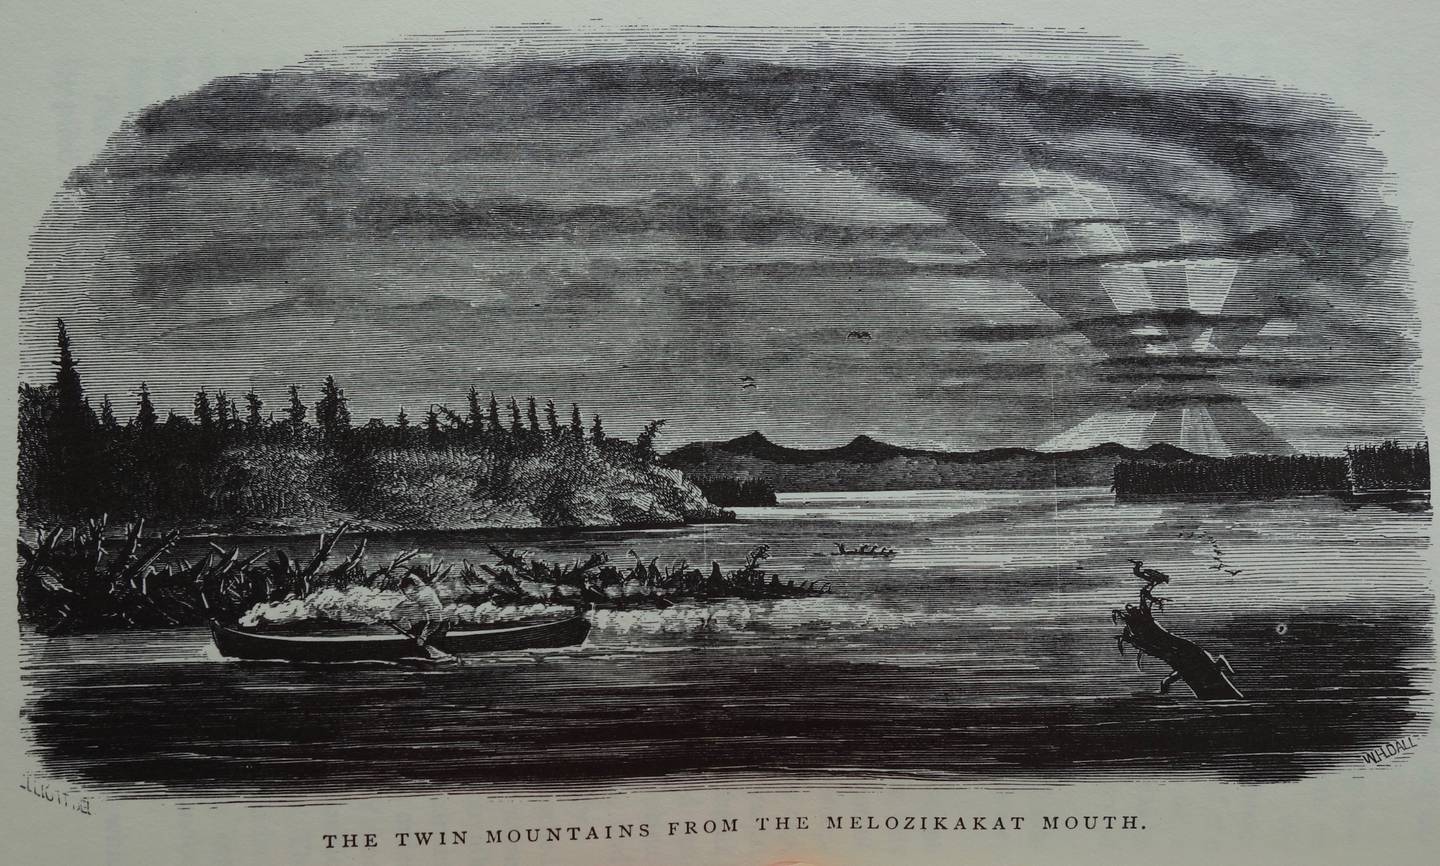 William Dall’s sketch of the mouth of what is now called the Melozitna River